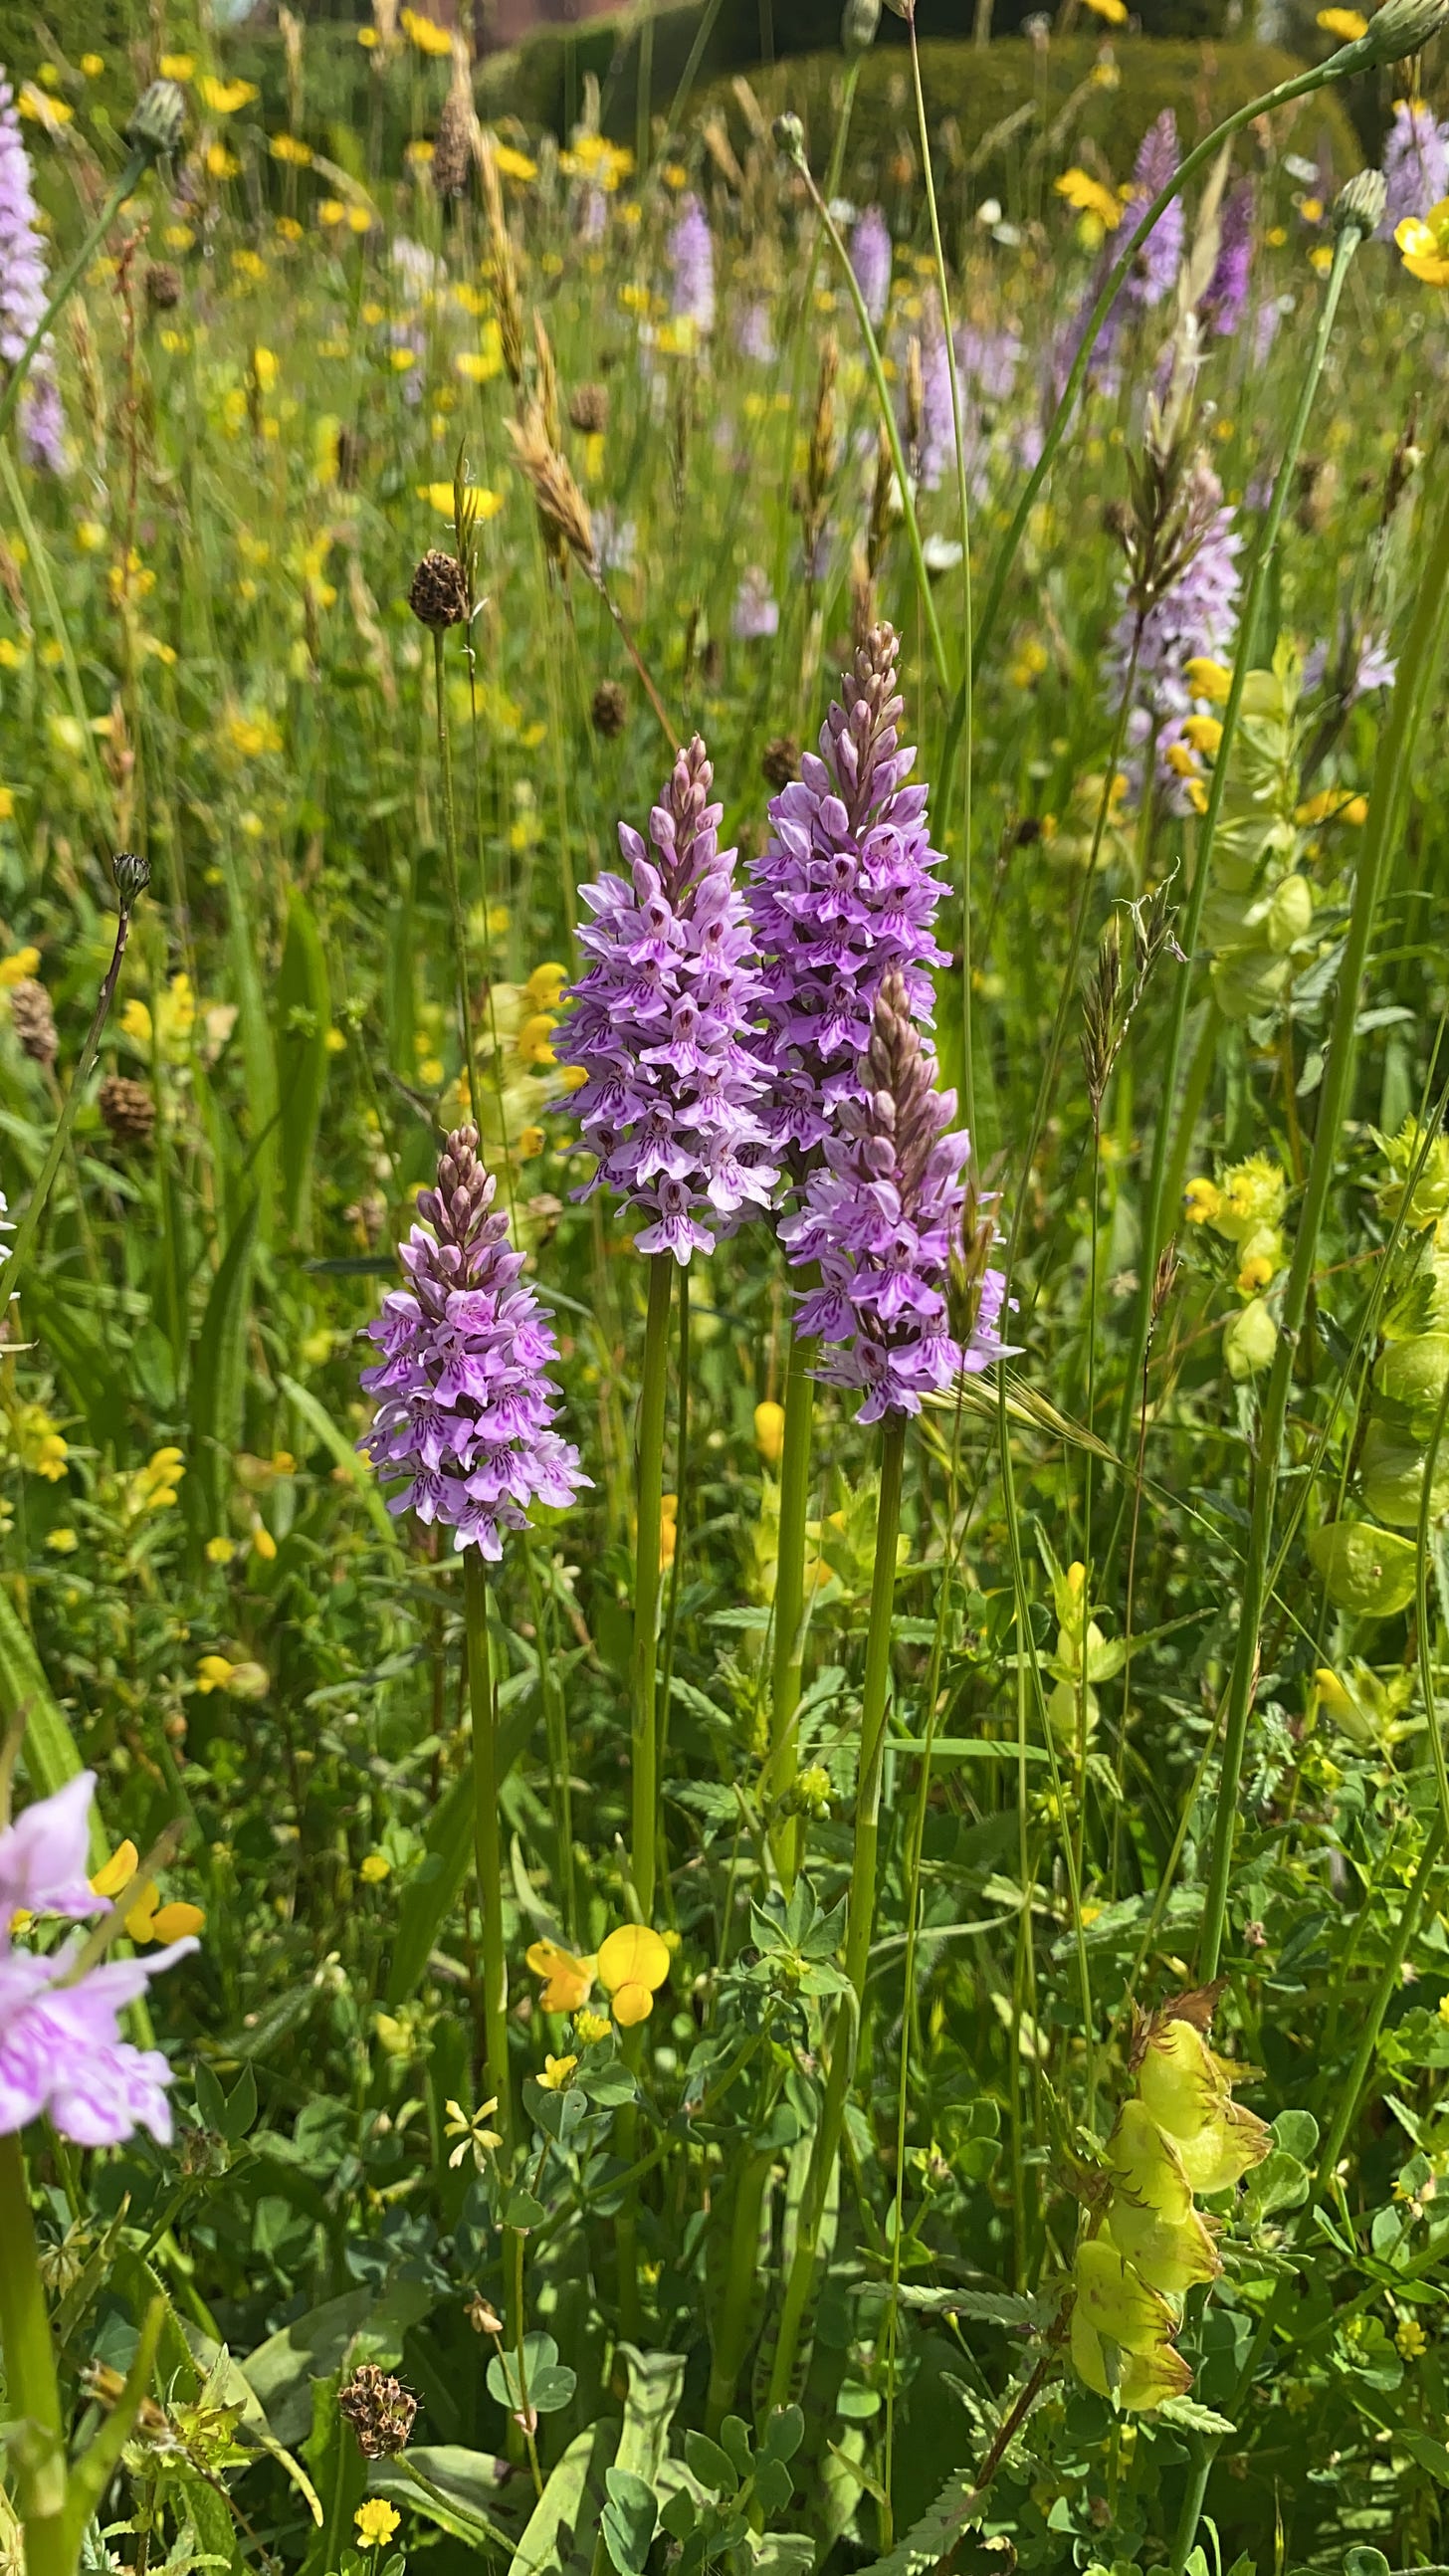 Orchids in the meadow at Great Dixter. Photo by Marianne Willburn